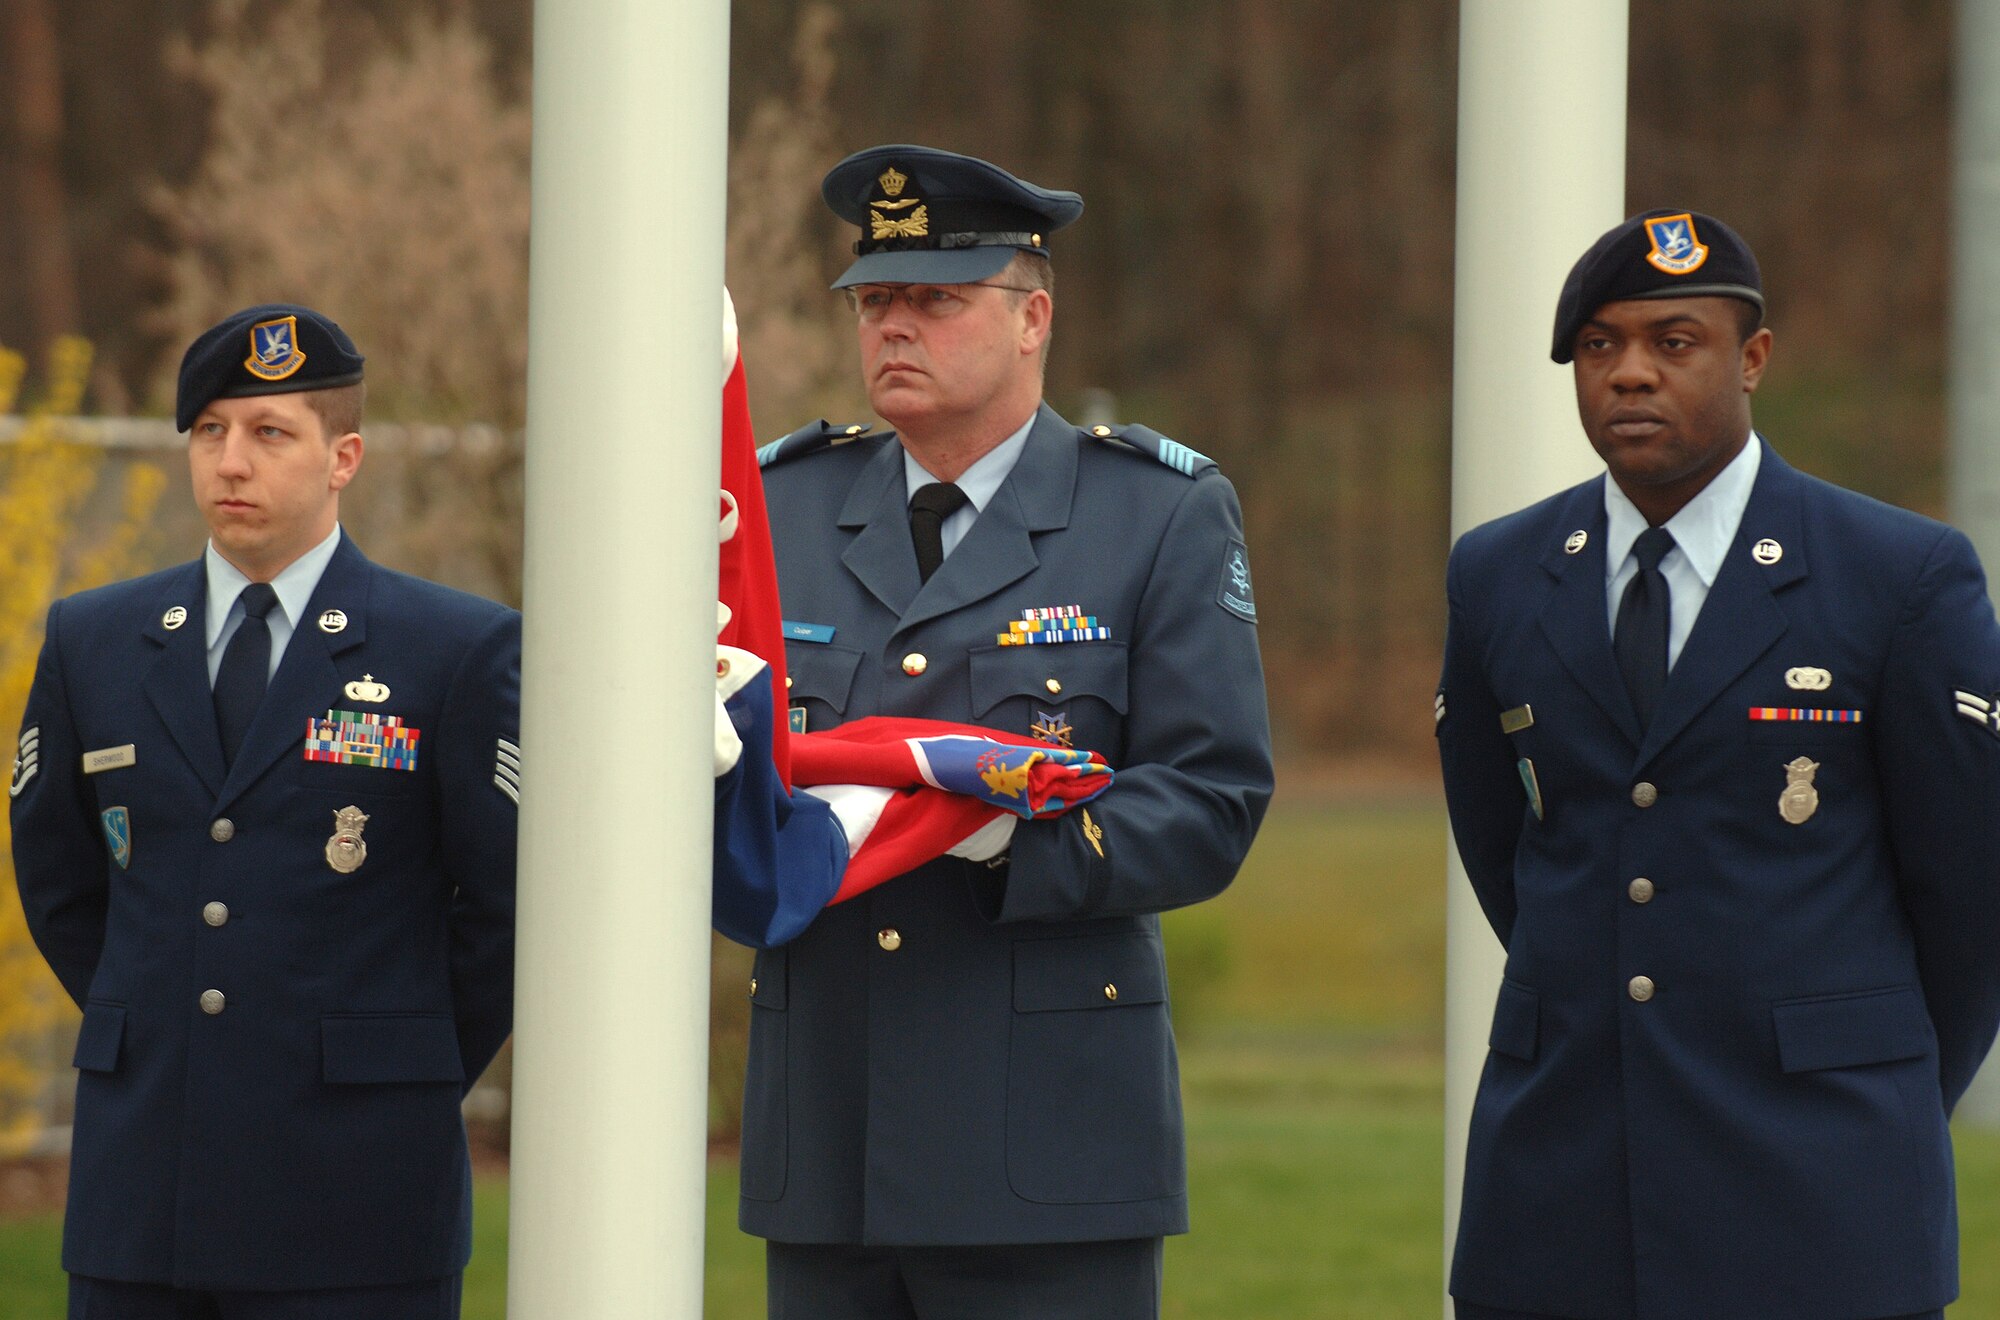 U.S. Air Force Staff Sgt. Leonard Sherwood and Amn. 1st Class Willie Johnson join Royal Netherlands Air Force Sergeant Major Martin Cuiter to hoist the Croatian flag during an April 8, 2009, ceremony at Ramstein Air Base, Germany, marking the accession of Croatia and Albania as the 27th and 28th members of NATO. (Department of Defense photo by Master Sgt. Scott Wagers / Defense Media Activity-Europe)